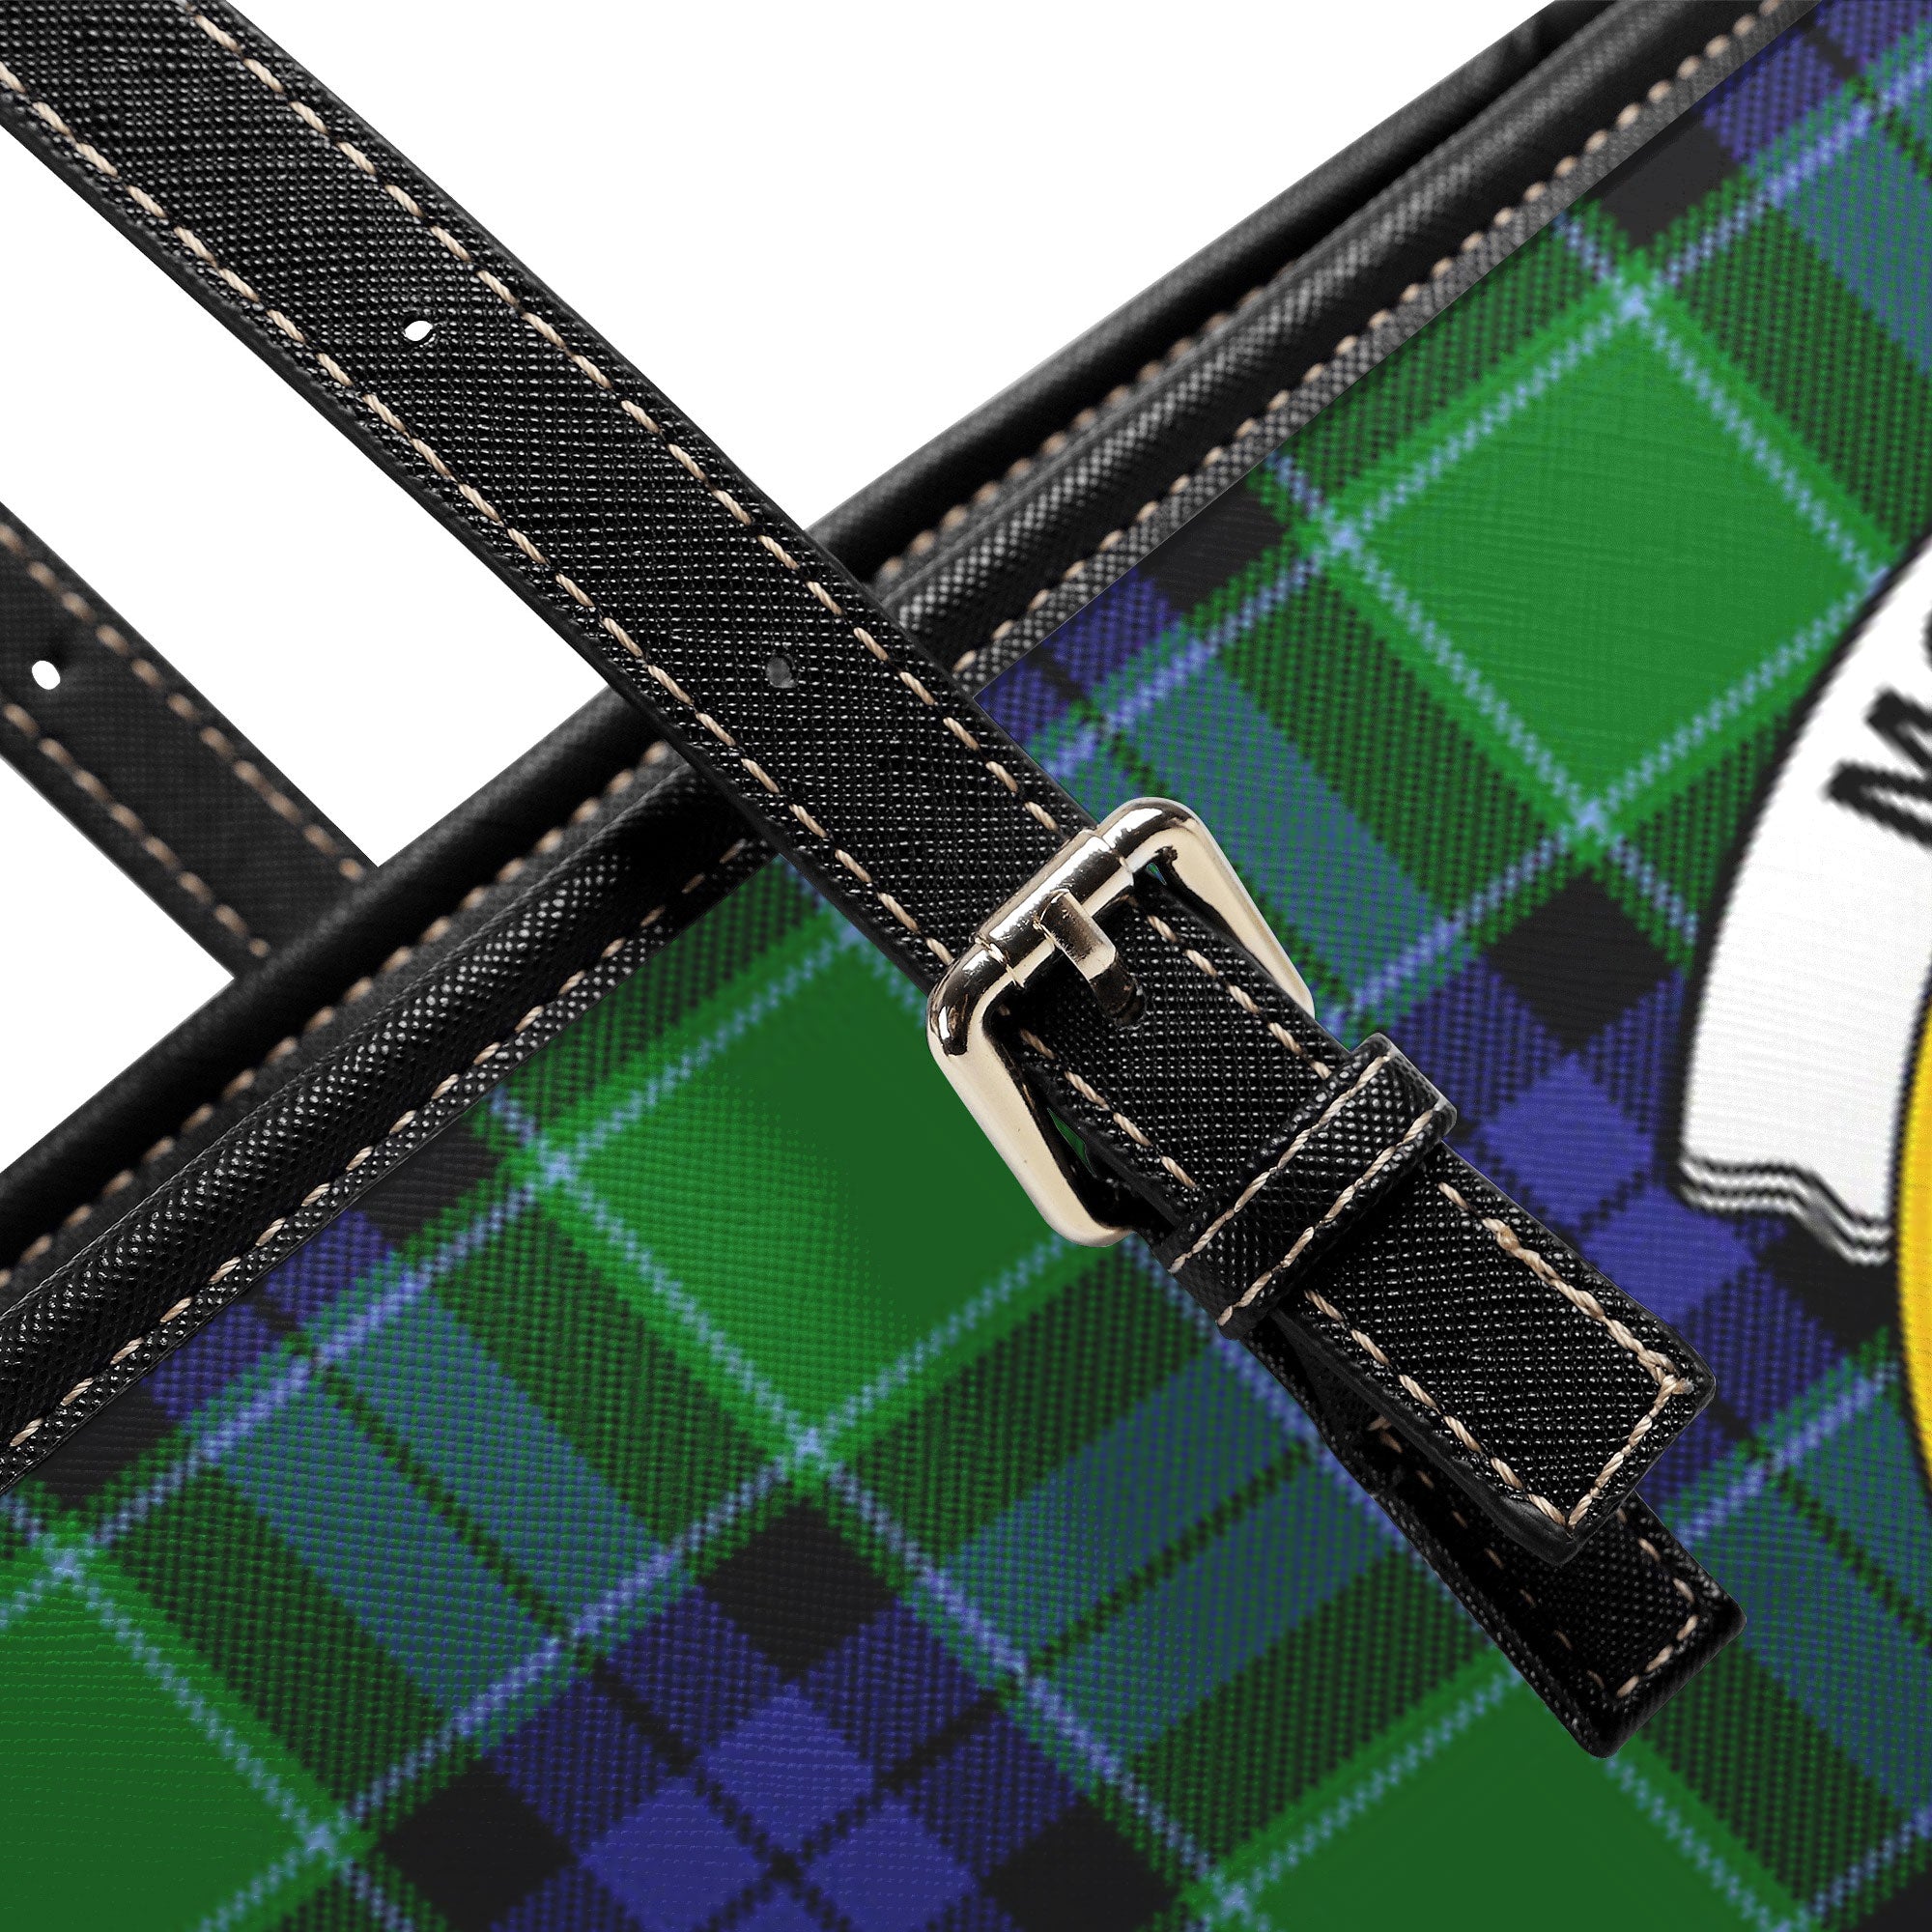 Monteith Tartan Crest Leather Tote Bag